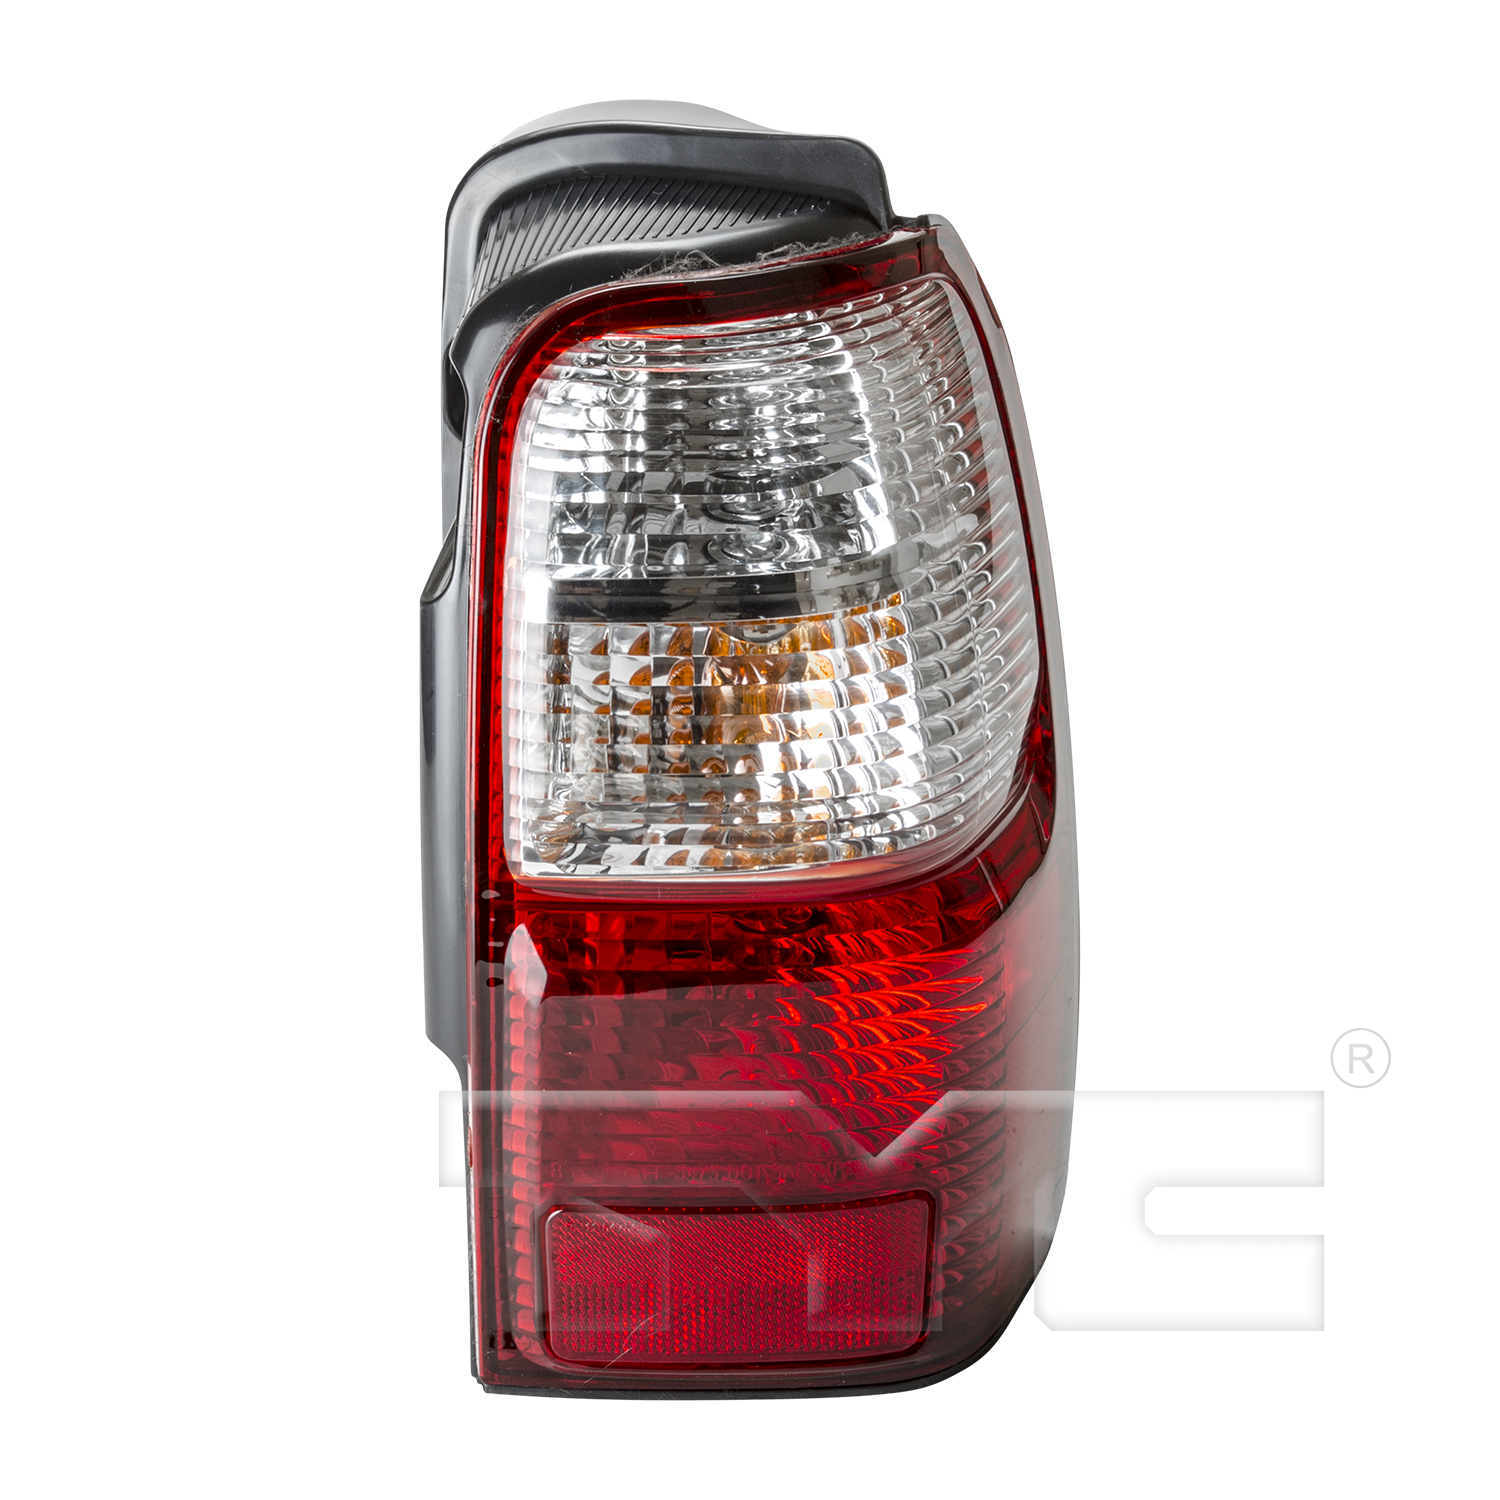 Aftermarket TAILLIGHTS for TOYOTA - 4RUNNER, 4RUNNER,01-02,RT Taillamp assy